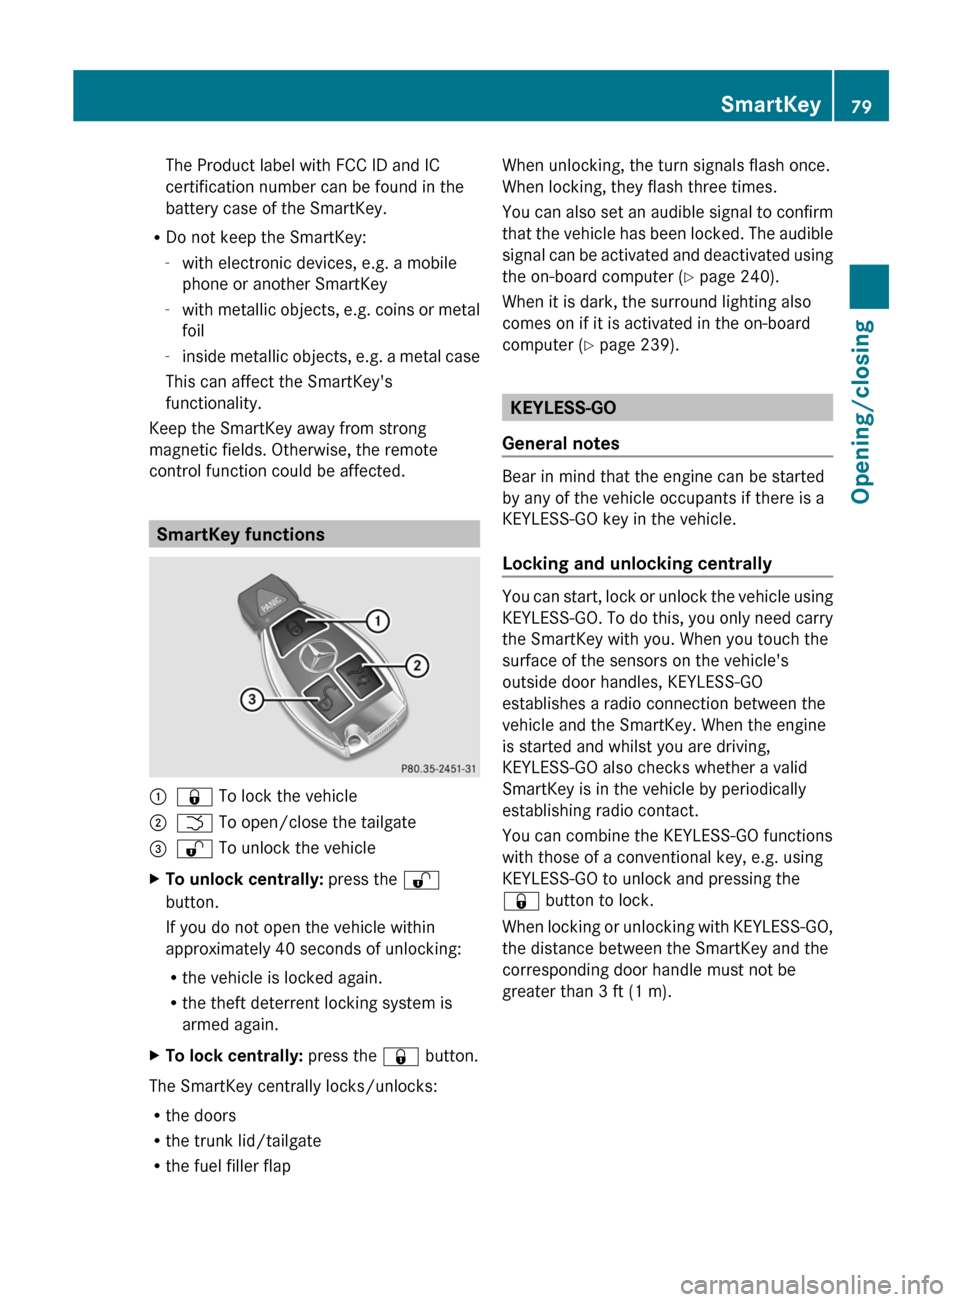 MERCEDES-BENZ E-Class SEDAN 2013 W212 Owners Manual The Product label with FCC ID and IC
certification number can be found in the
battery case of the SmartKey.
R Do not keep the SmartKey:
-with electronic devices, e.g. a mobile
phone or another SmartKe